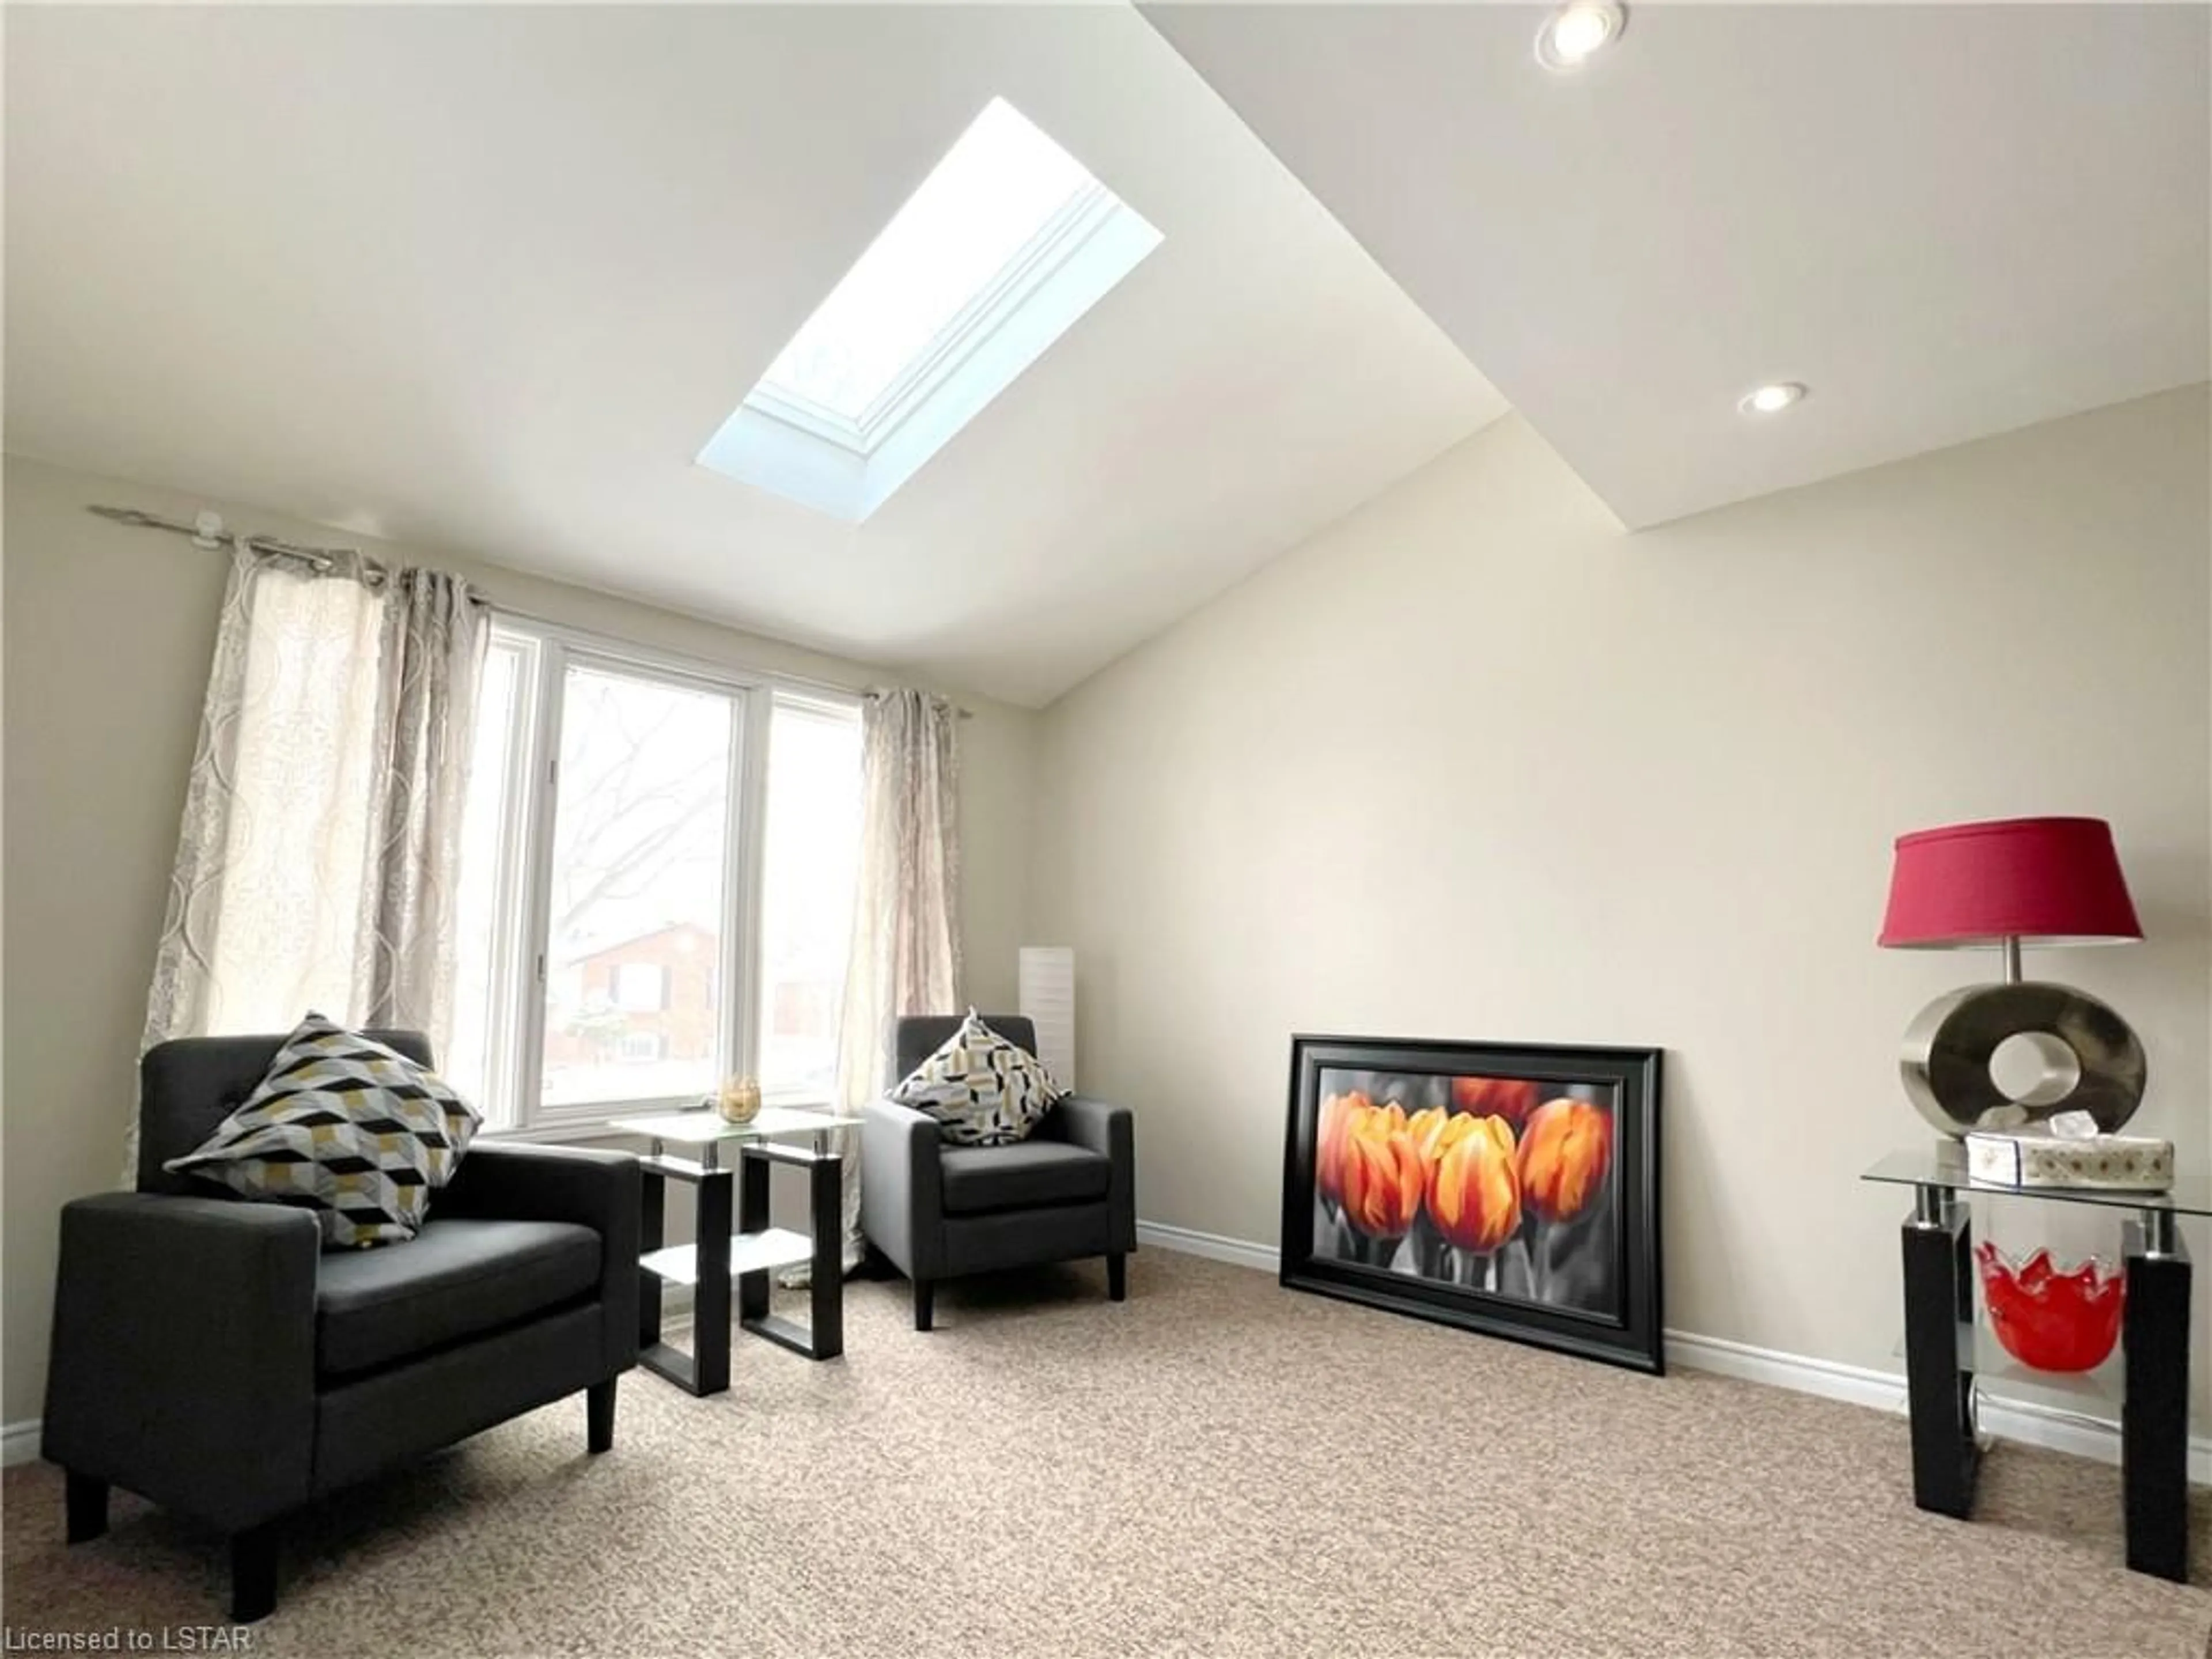 A pic of a room for 308 Castlegrove Blvd, London Ontario N6G 3T5